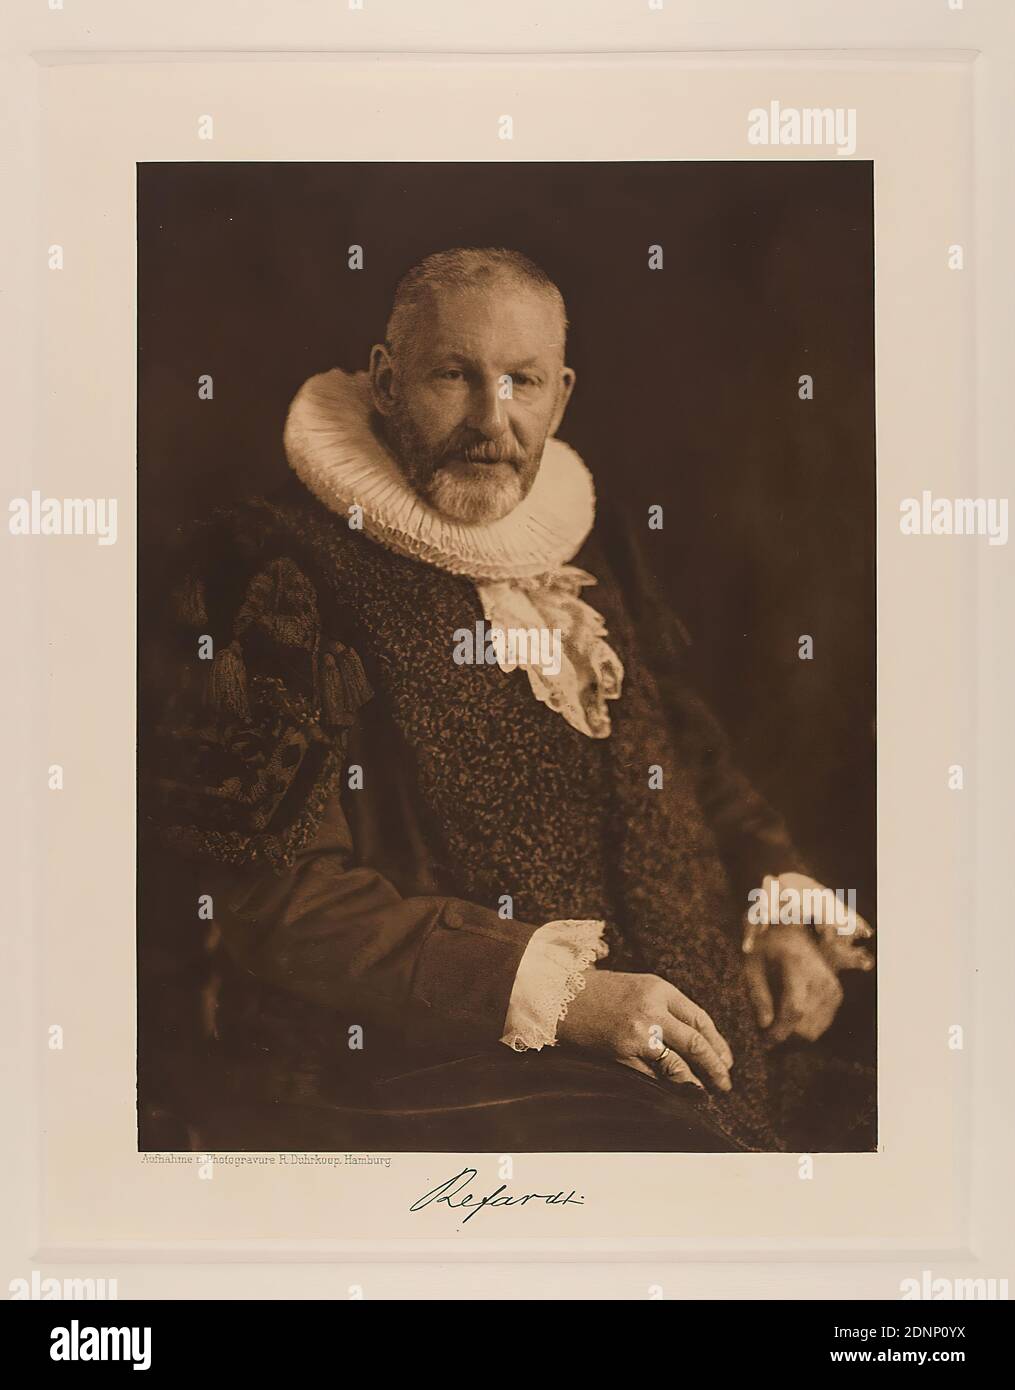 Rudolph Dührkoop, Senator J. F. C. Refardt from the portfolio Hamburgische Männer und Frauen am Anfang des XX. Century, Staatliche Landesbildstelle Hamburg, Collection on the History of Photography, paper, heliogravure, picture size: Height: 22,00 cm; Width: 16,50 cm, signed: recto below the picture: Exposed signature of the sitter, inscribed: recto: engraved on printing plate, below the picture: photograph and photogravure R. Dührkoop, Hamburg, top right in the corner in lead: 12, stamp: recto: handwritten addition: Inv. no. and reference to repro, portrait photography, portrait, en face Stock Photo